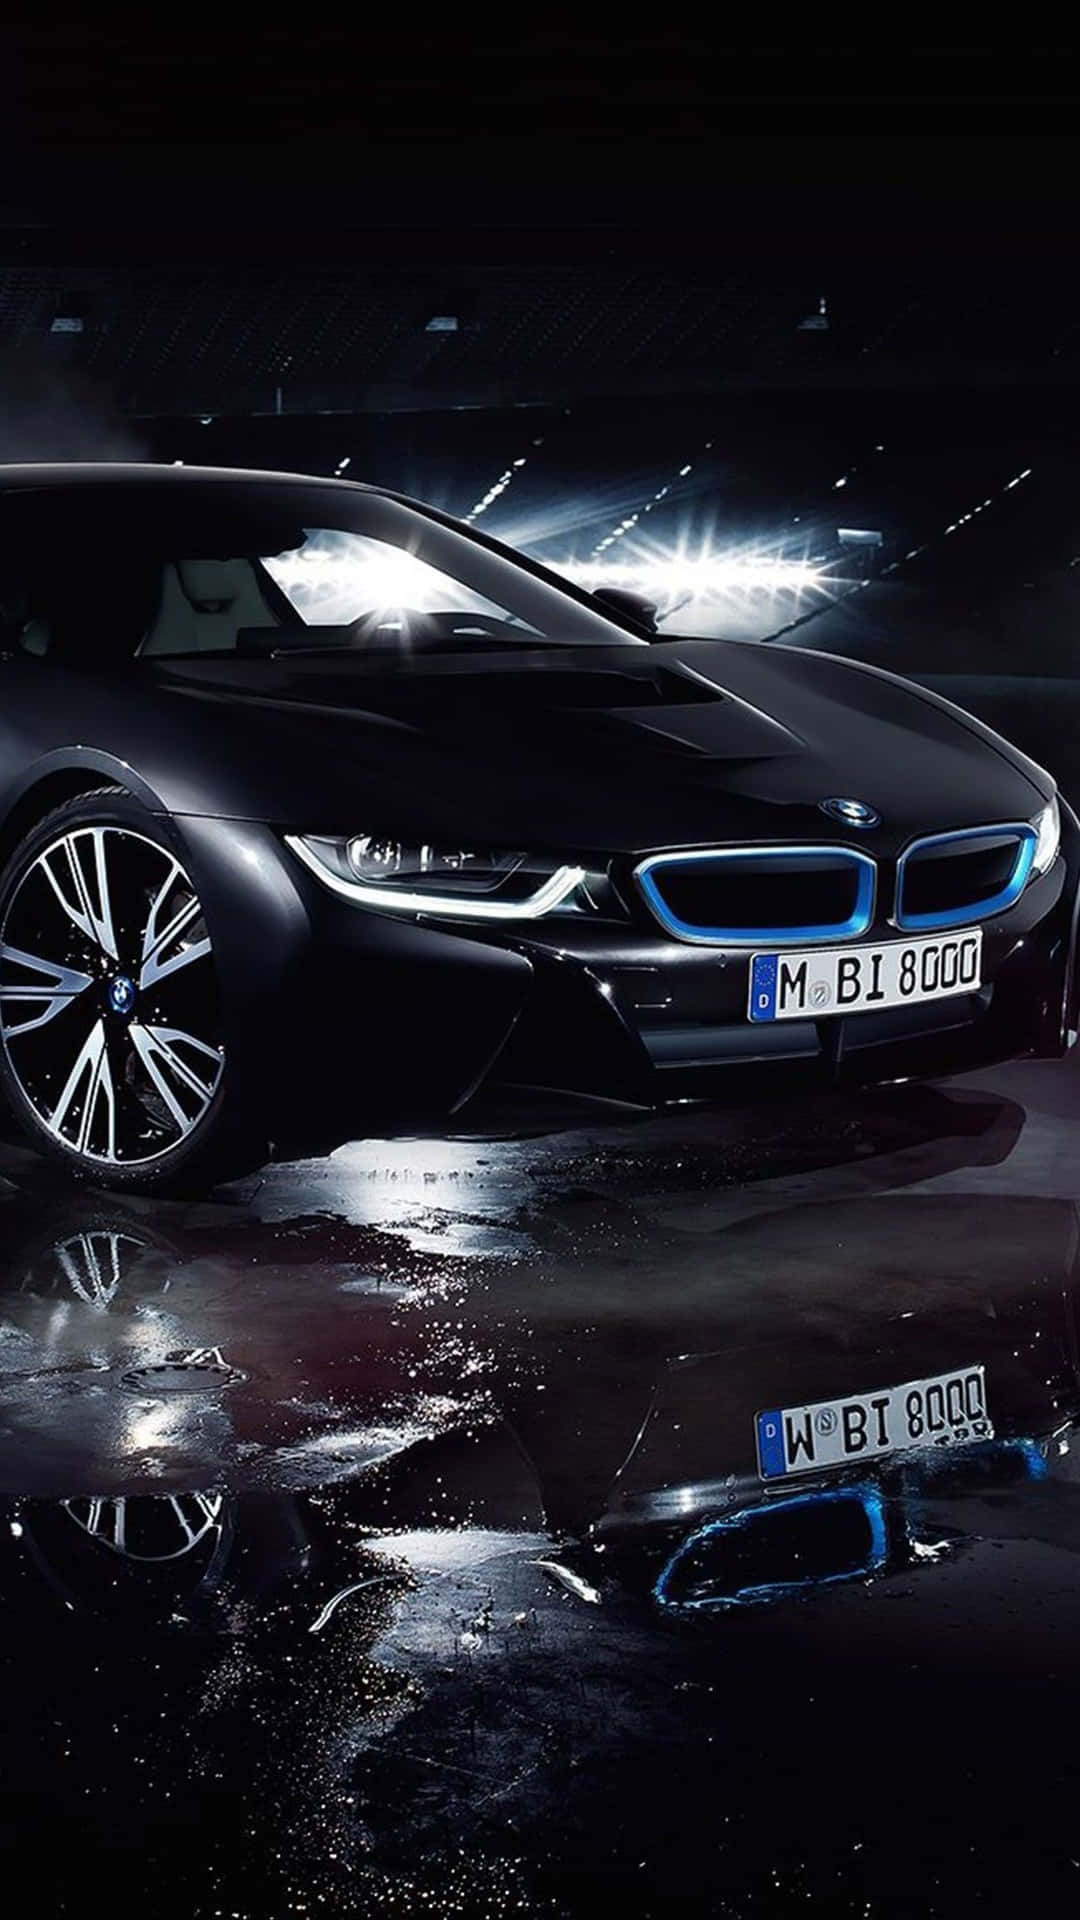 Get the Connected comfort of Android with the BMW 3-Series Wallpaper